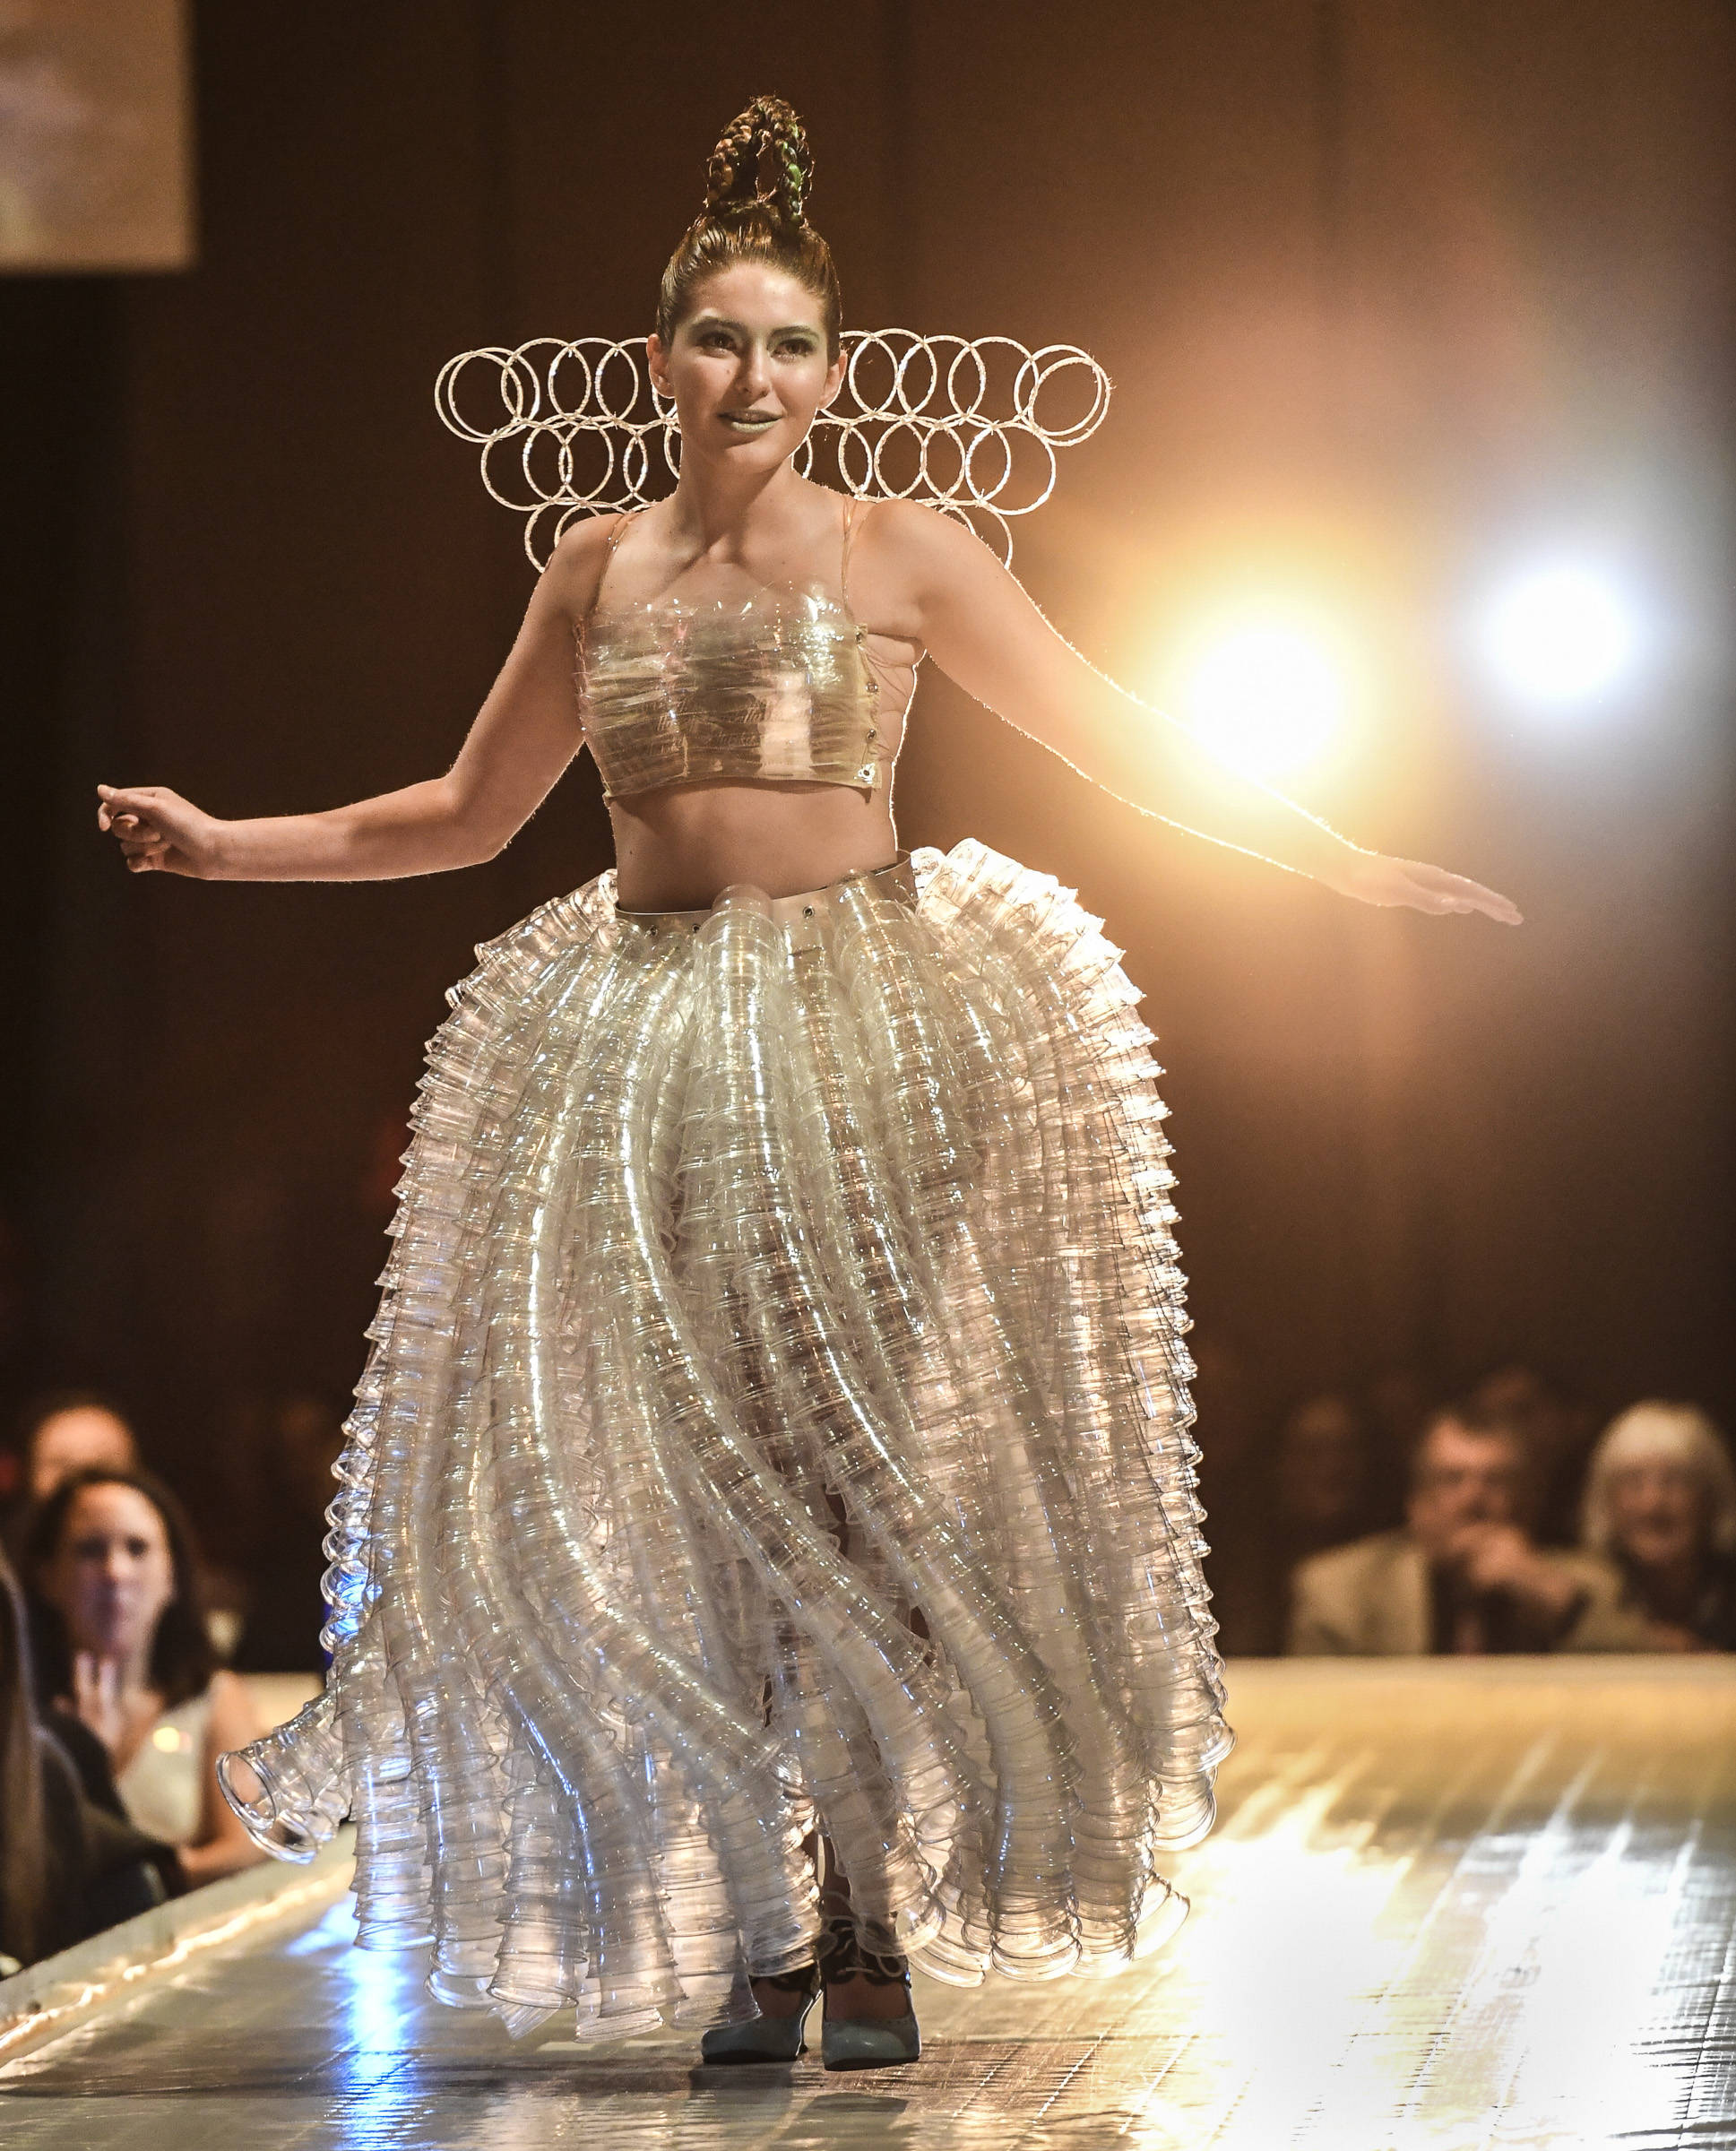 Olivia Moore models her and Karen Smith’s “Plastic Resuscitation” during the Wearable Art Show at Centennial Hall on Saturday, Feb. 16, 2019. (Michael Penn | Capital City Weekly)